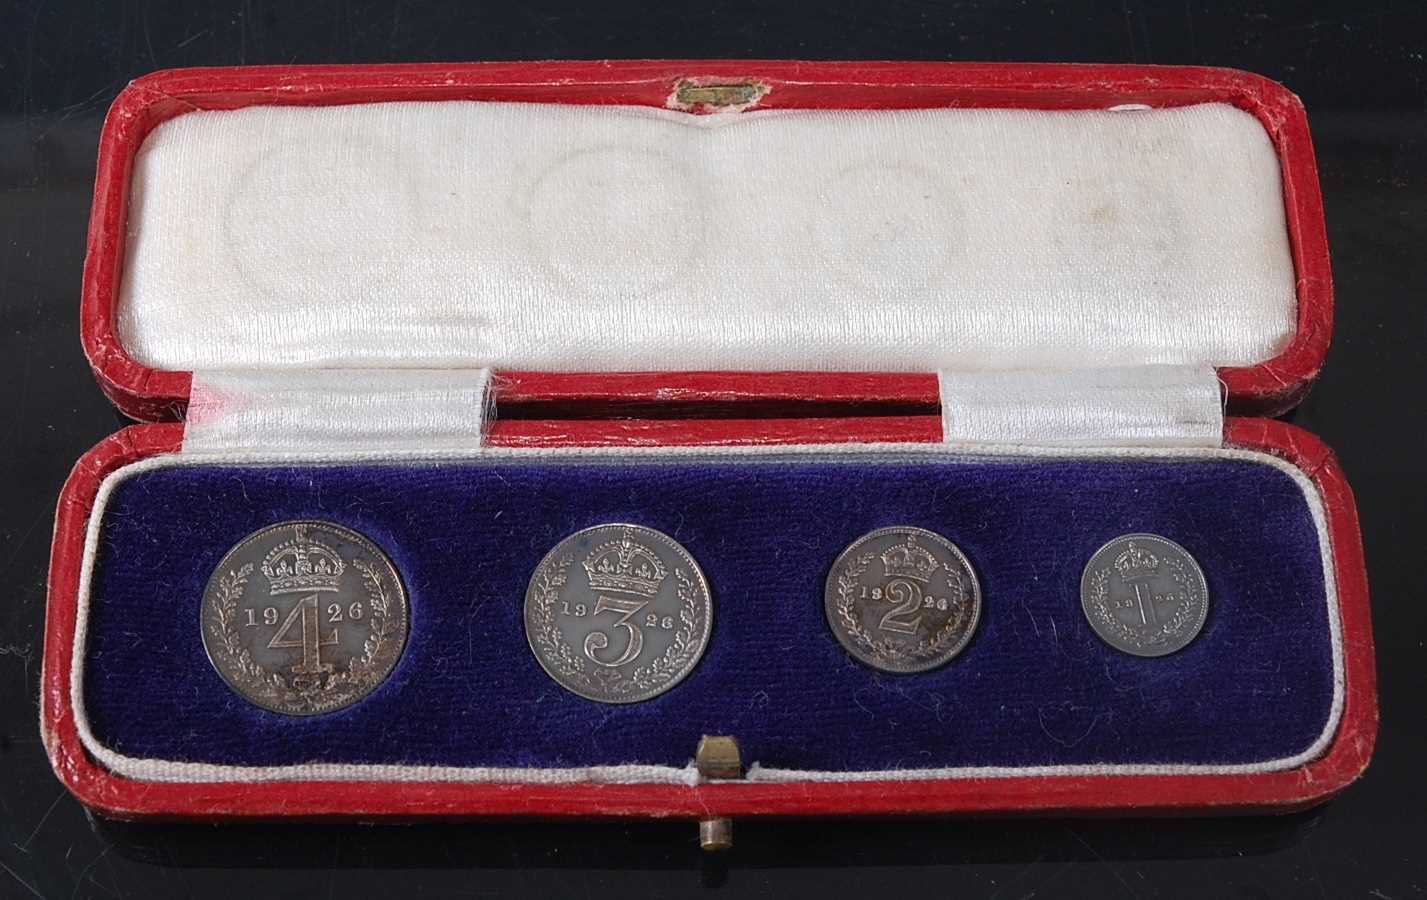 Lot 2117 - Great Britain, 1926 Maundy Money four coin set...